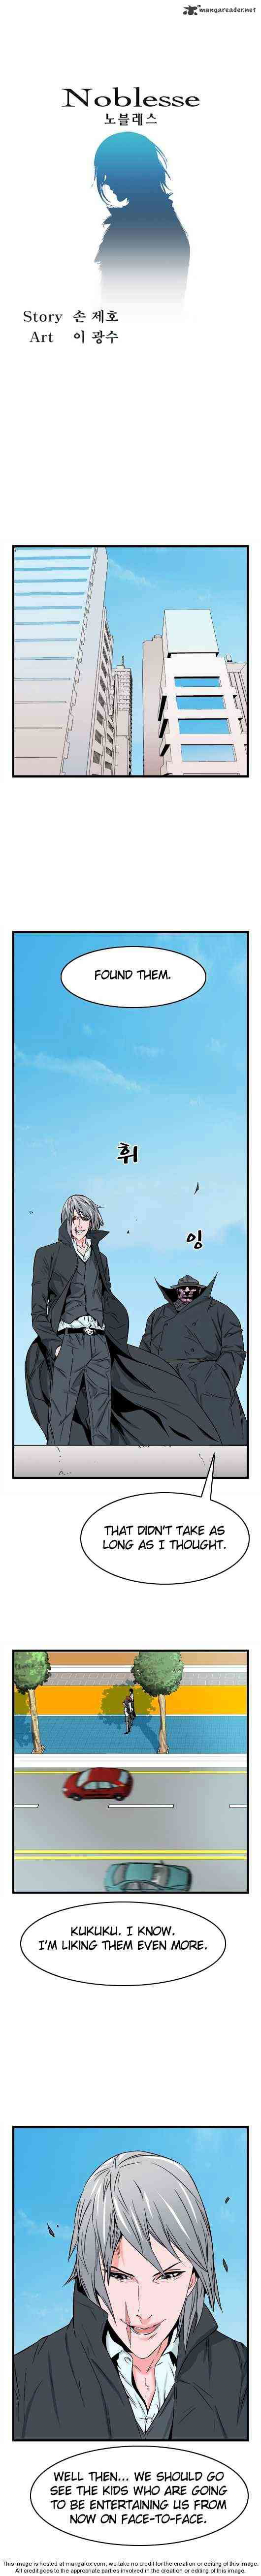 Noblesse Chapter 22 _ Chapters 22-30 page 1